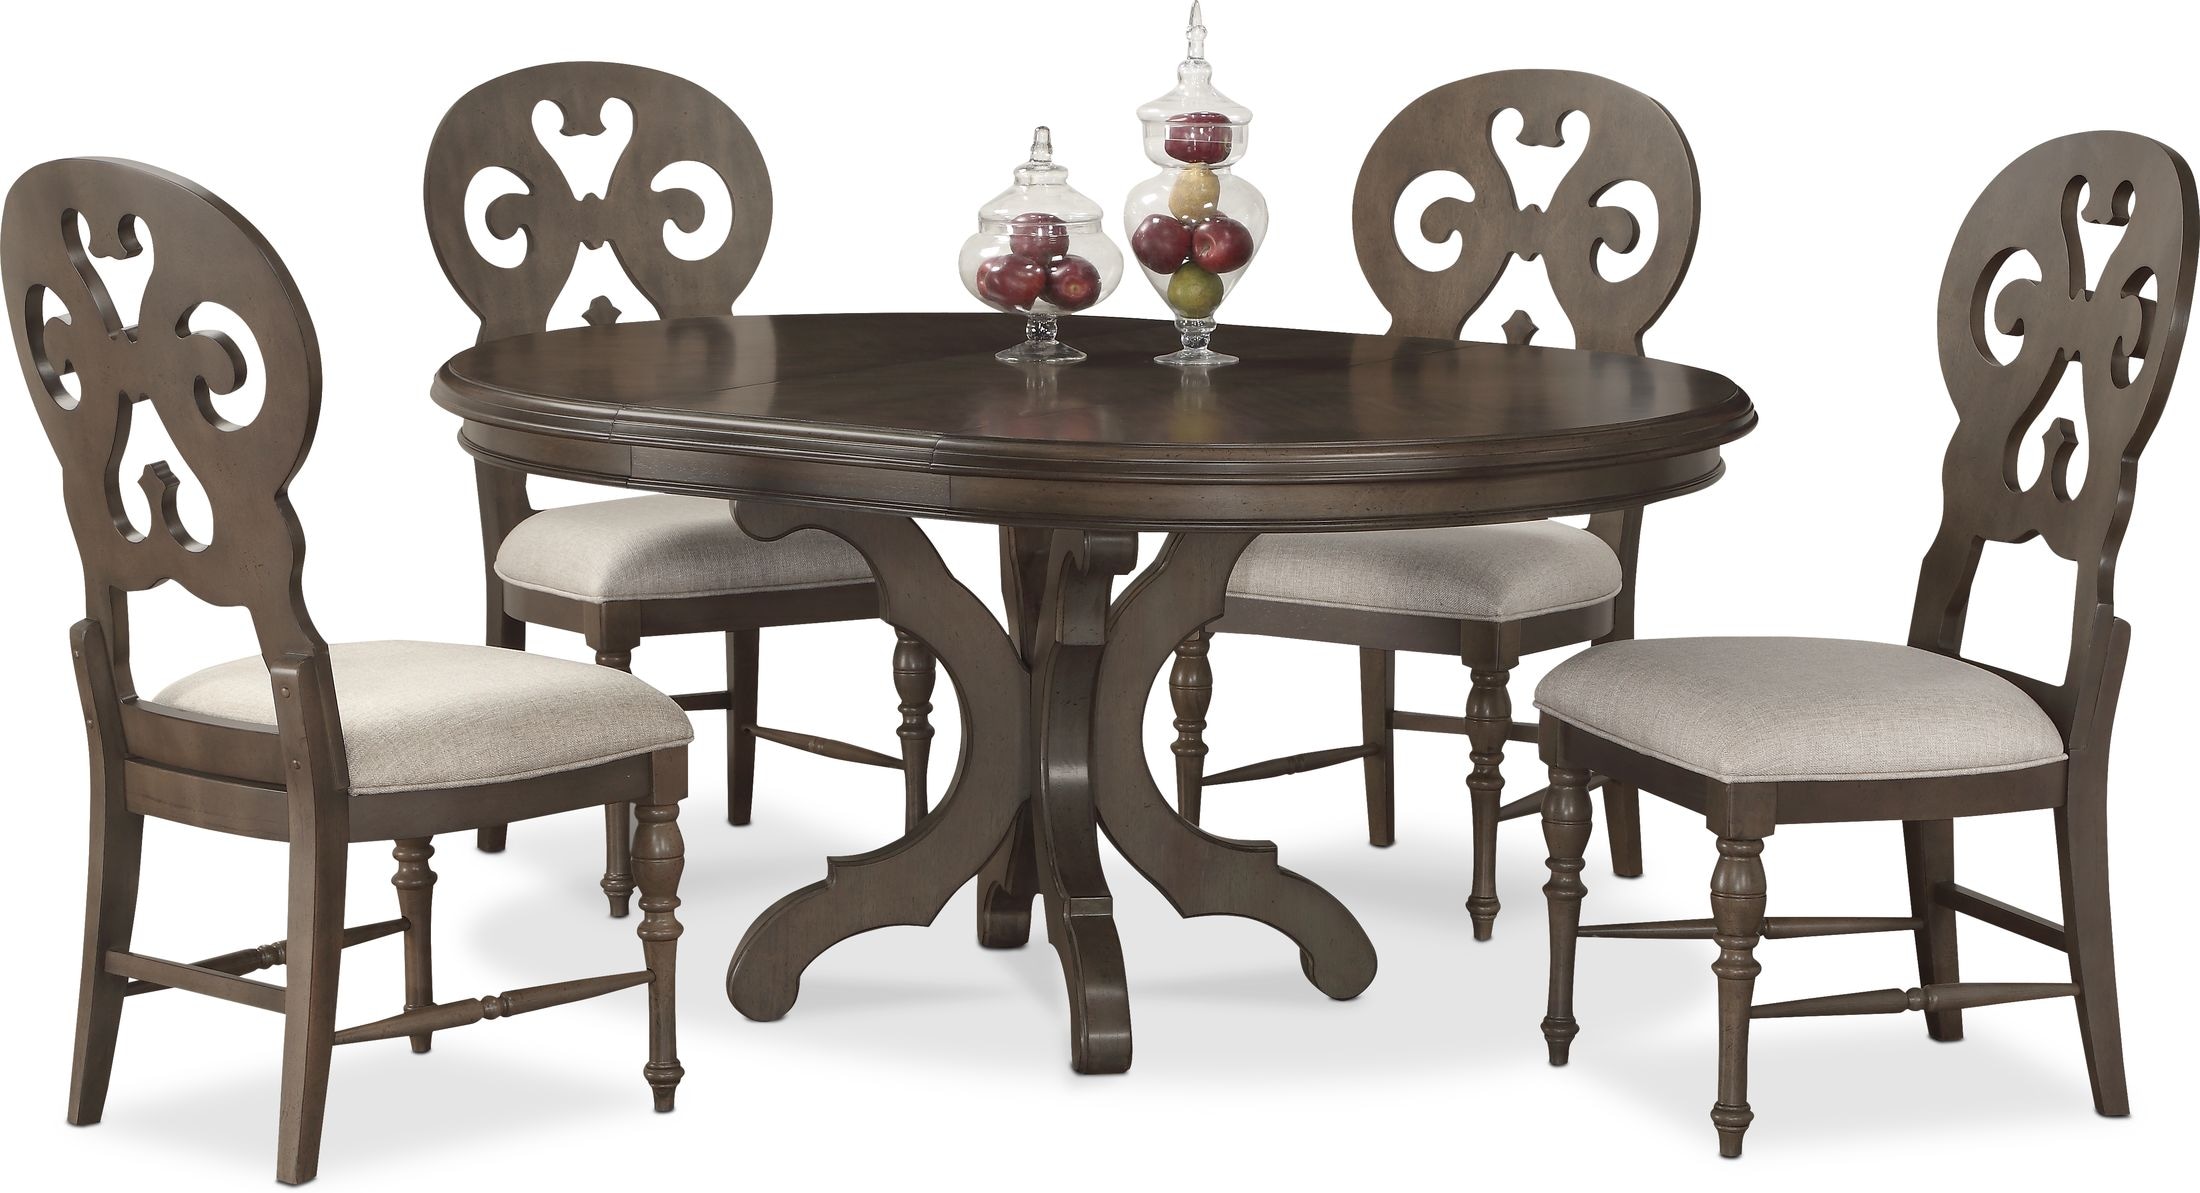 Value City Dining Table And Chairs Off, Value City Dining Room Furniture